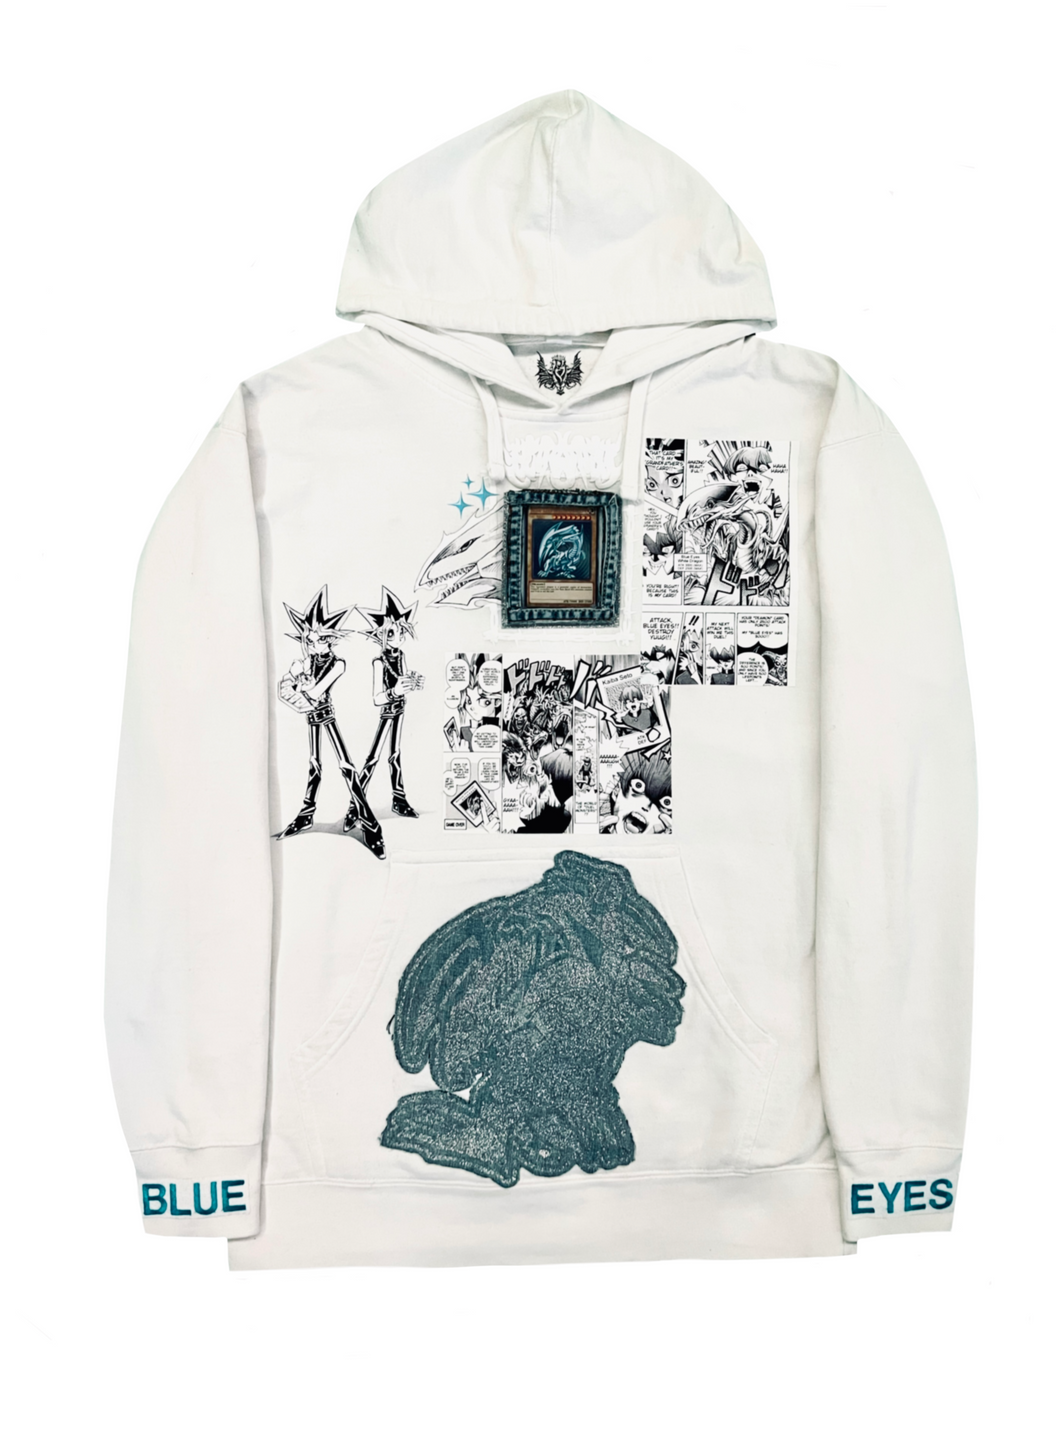 Blue-Eyes White Dragon Holographic Card Hoodie (Size: L) NEW!